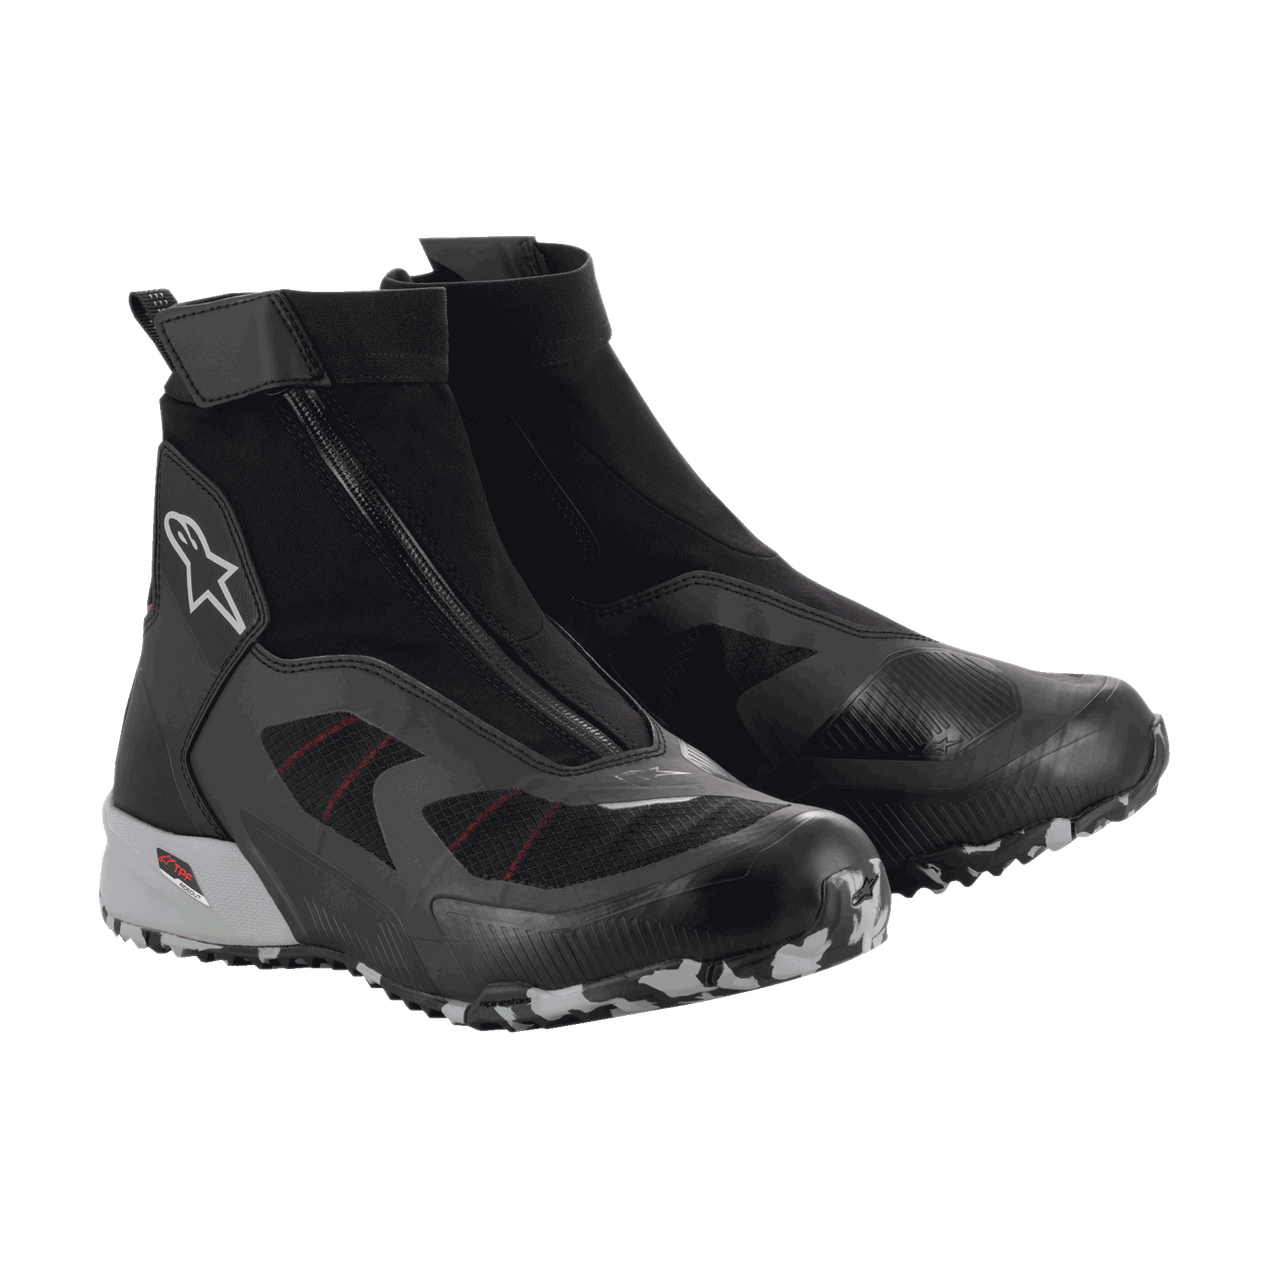 Adventure Touring Riding Shoes